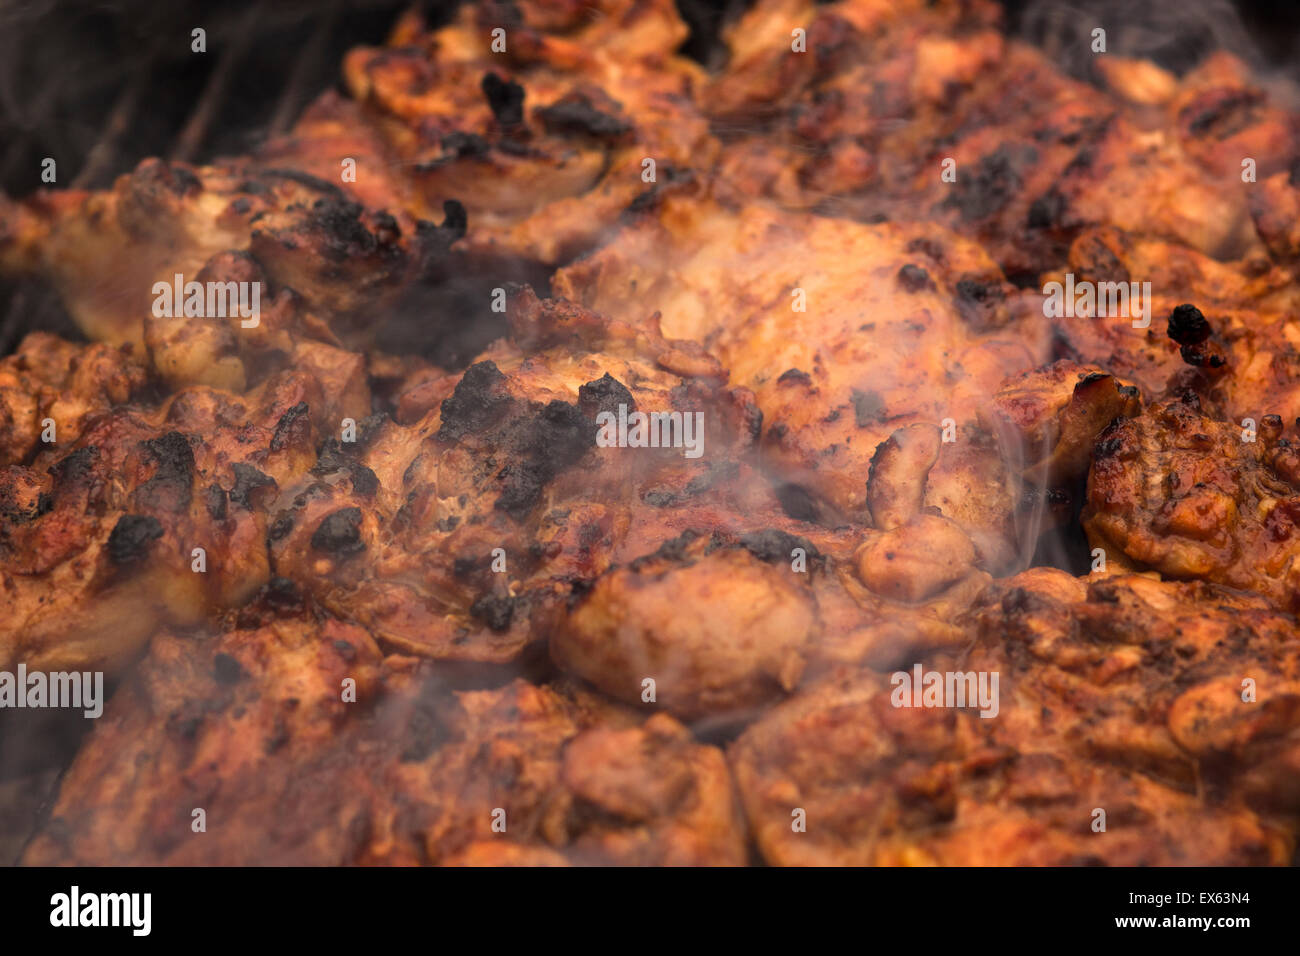 BBQ chicken cooking on a grill. Stock Photo